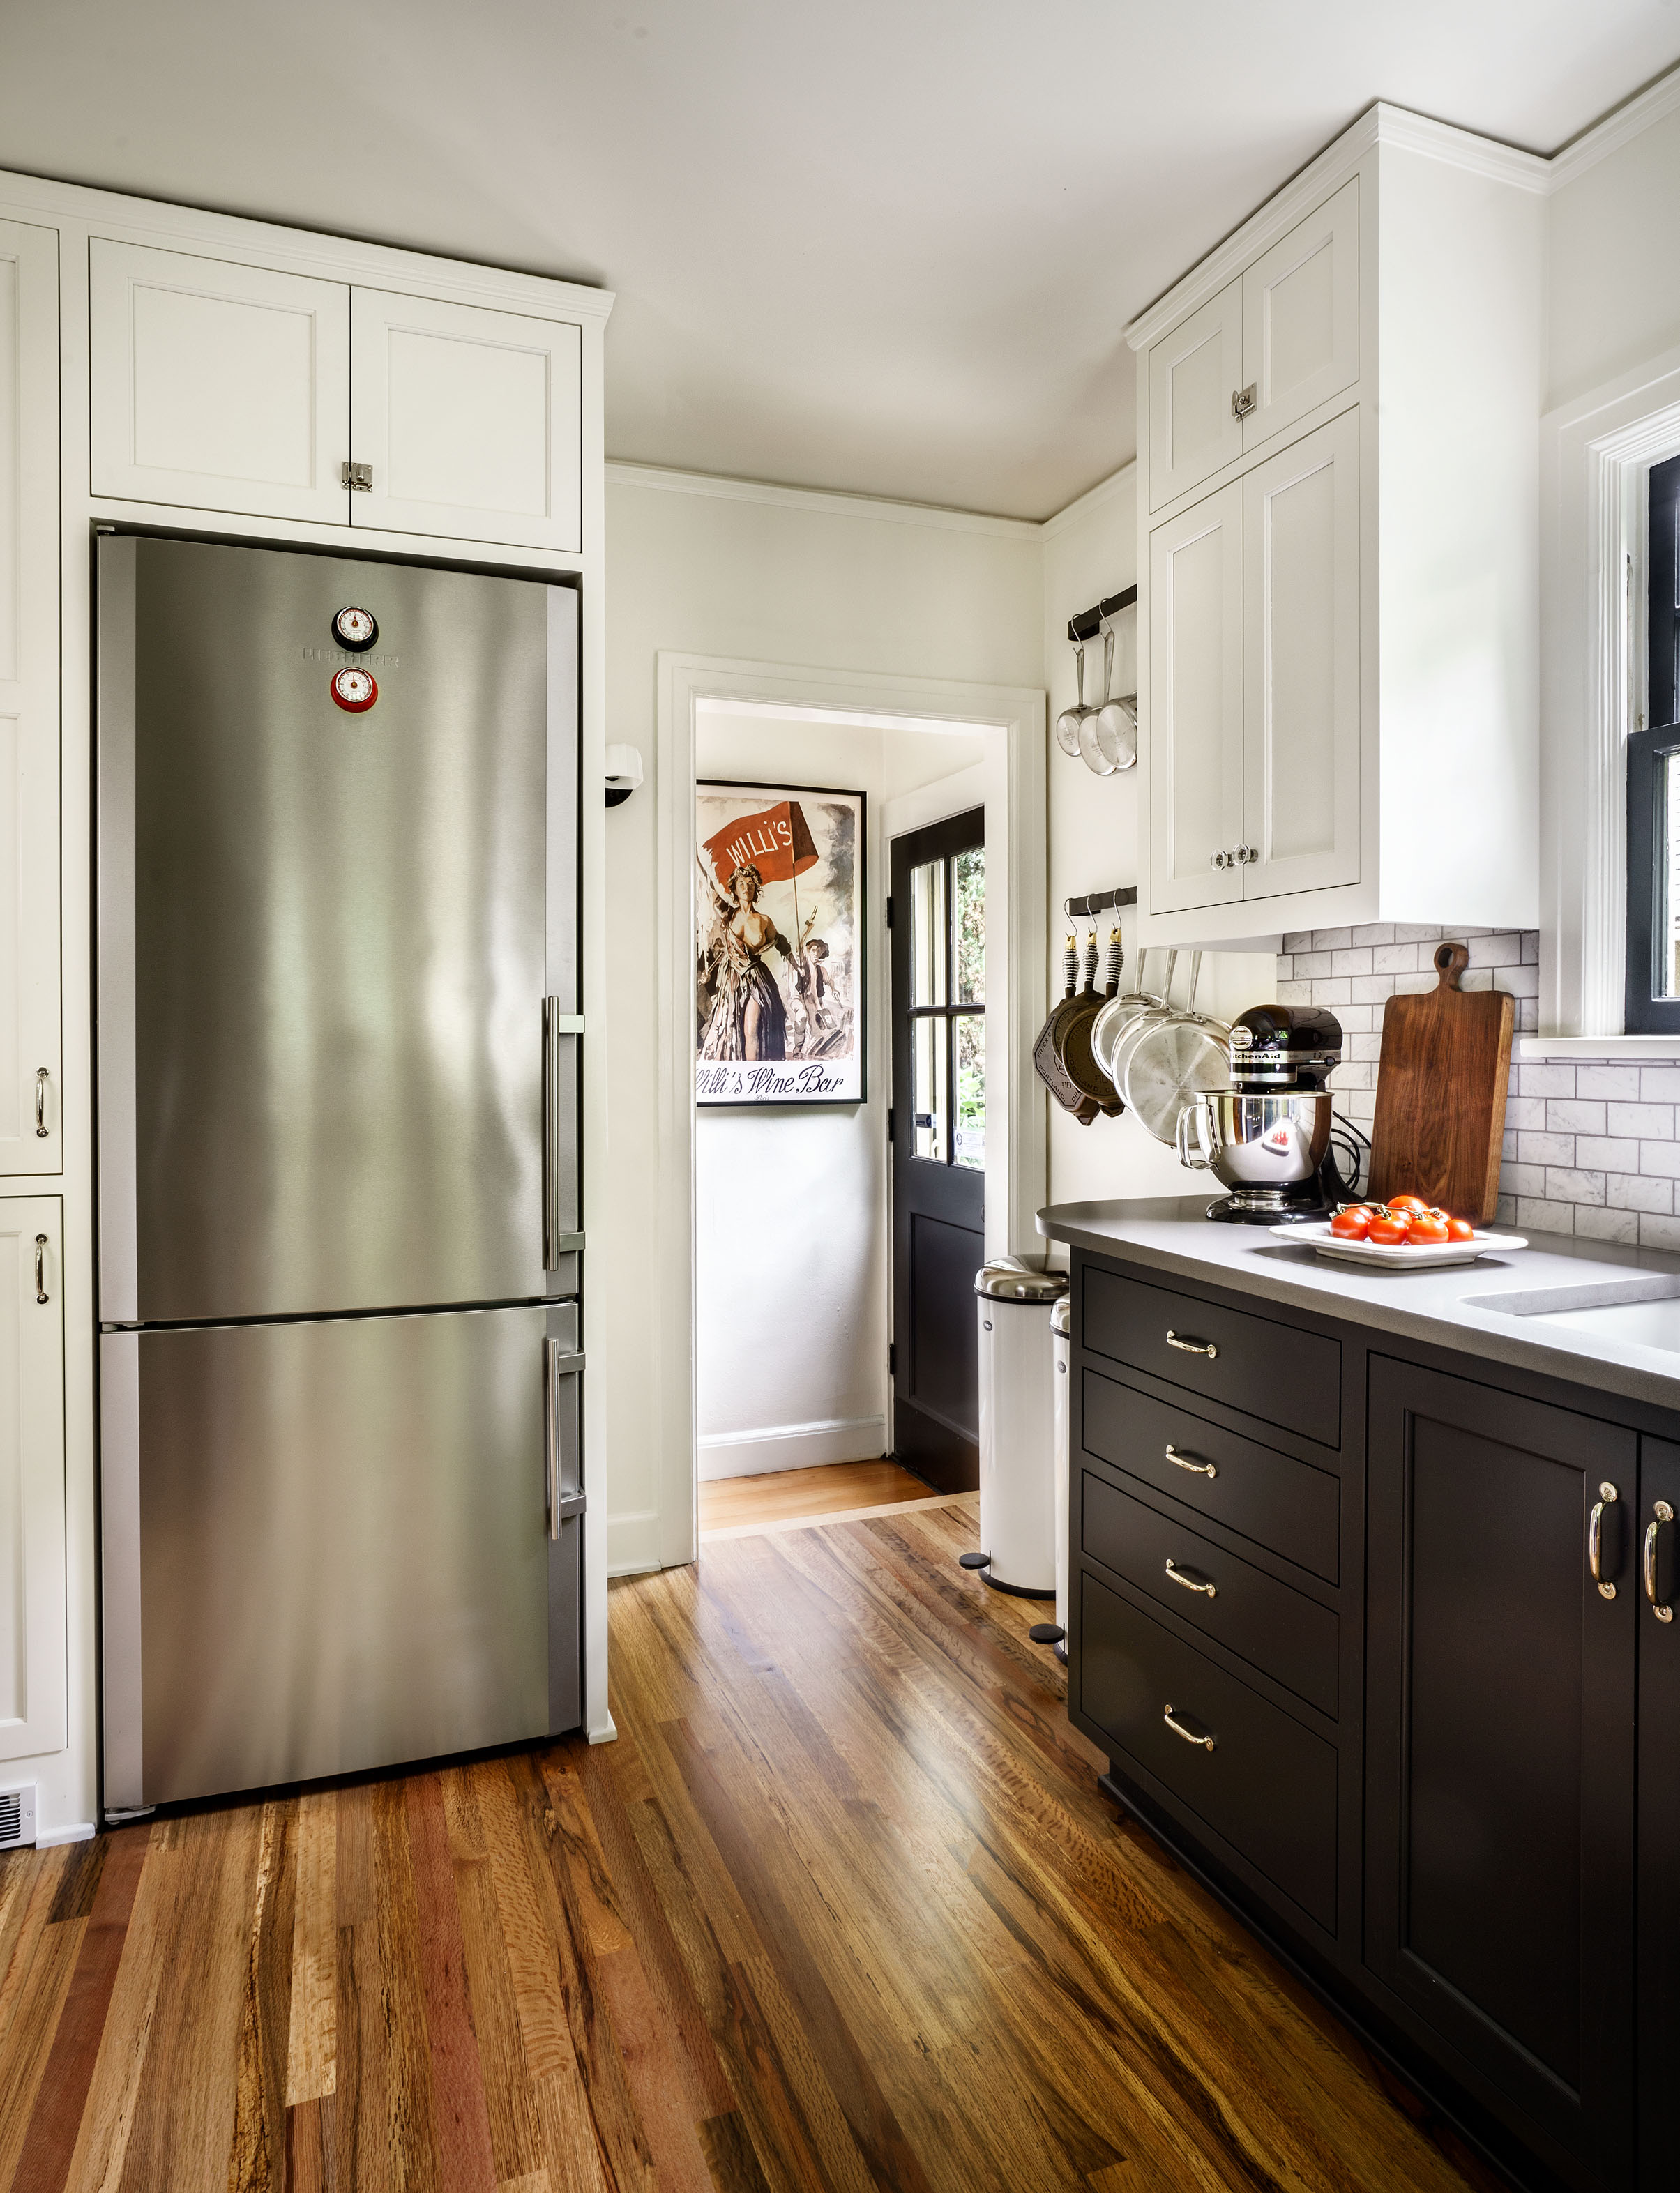 Freestanding fridge integrates into the cabinetry.